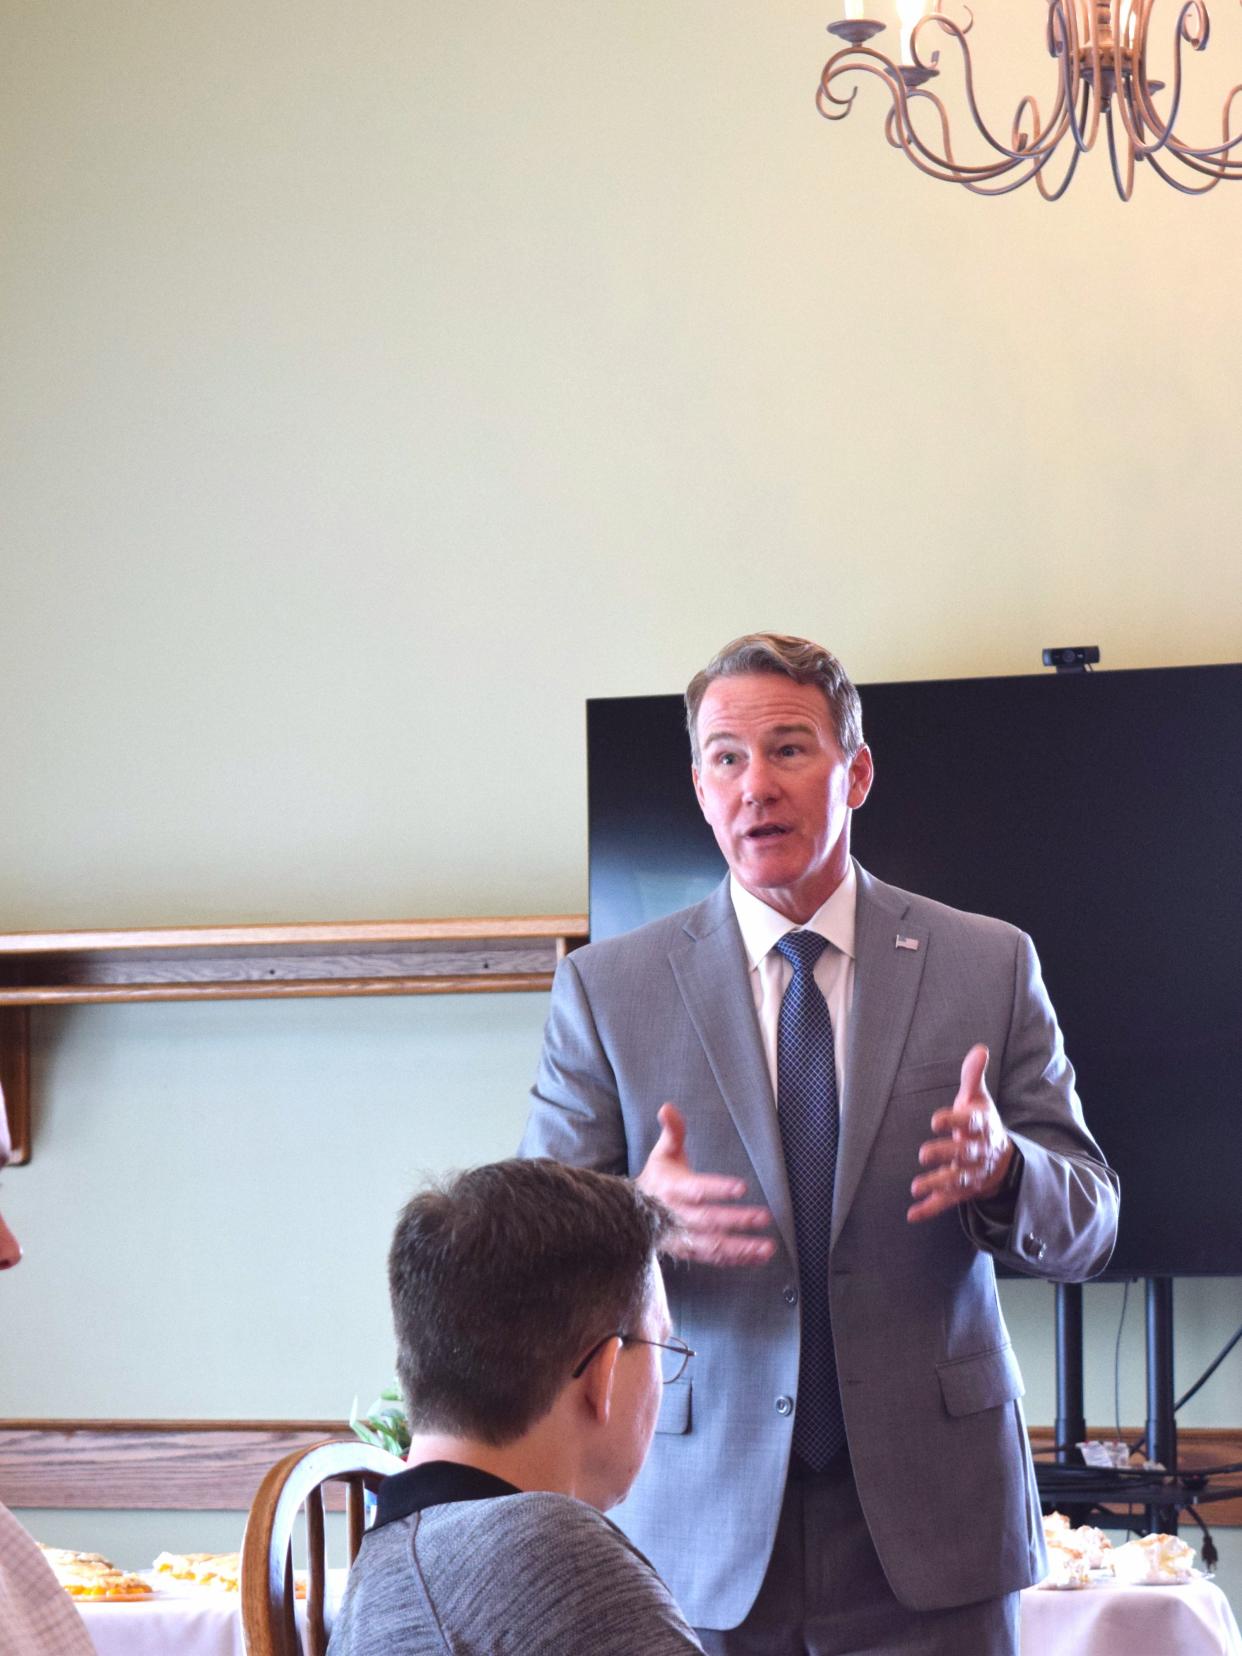 Gubernatorial candidate John Husted explained that his aspirations as governor are to make Ohio the unquestionable leader in the country for economic development.